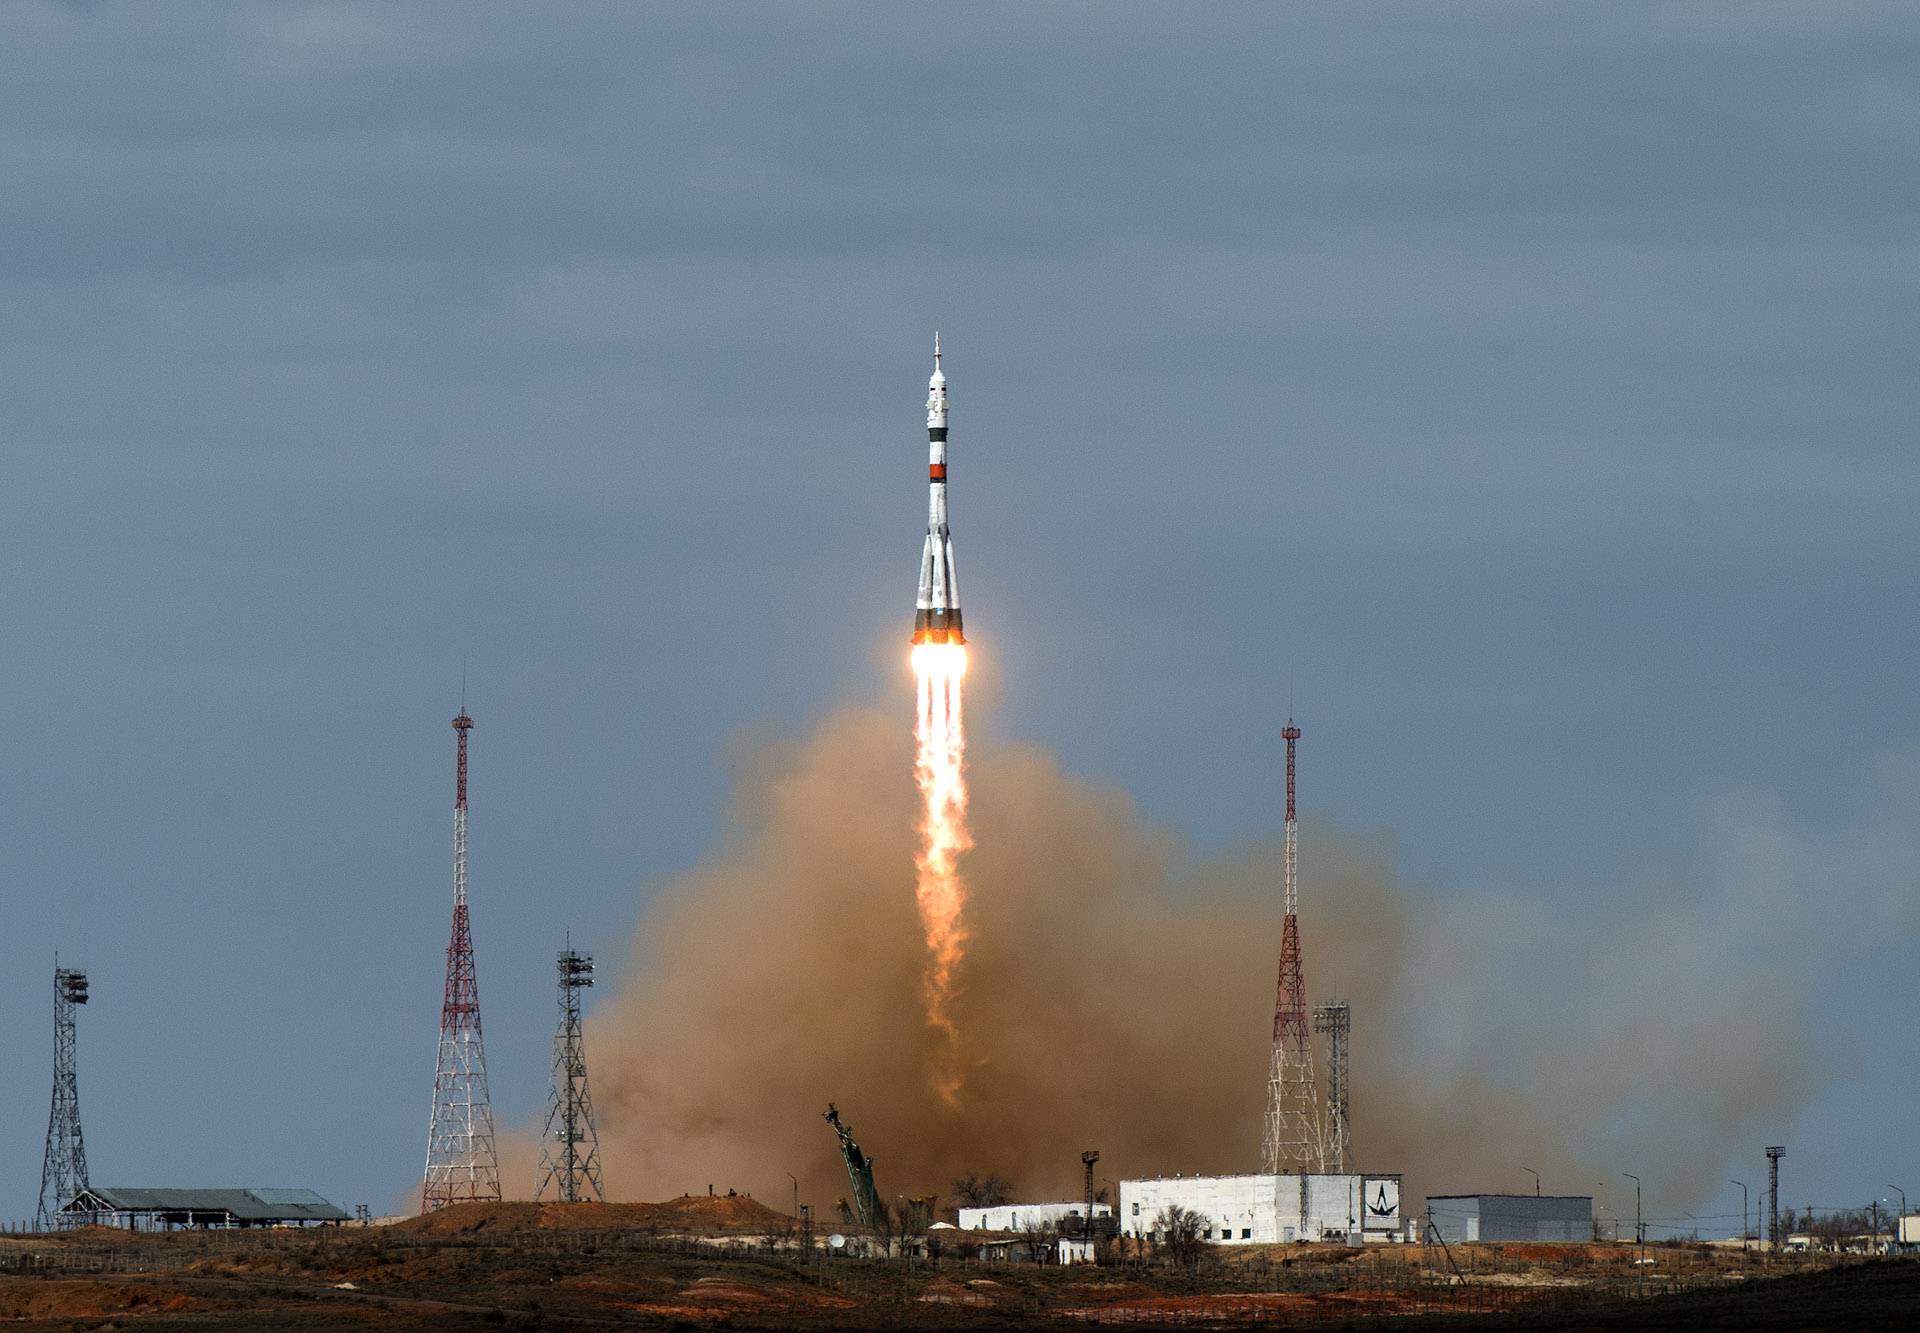 Soyuz MS-16 spacecraft carrying ISS crew blasts off from the launchpad at the Baikonur Cosmodrome